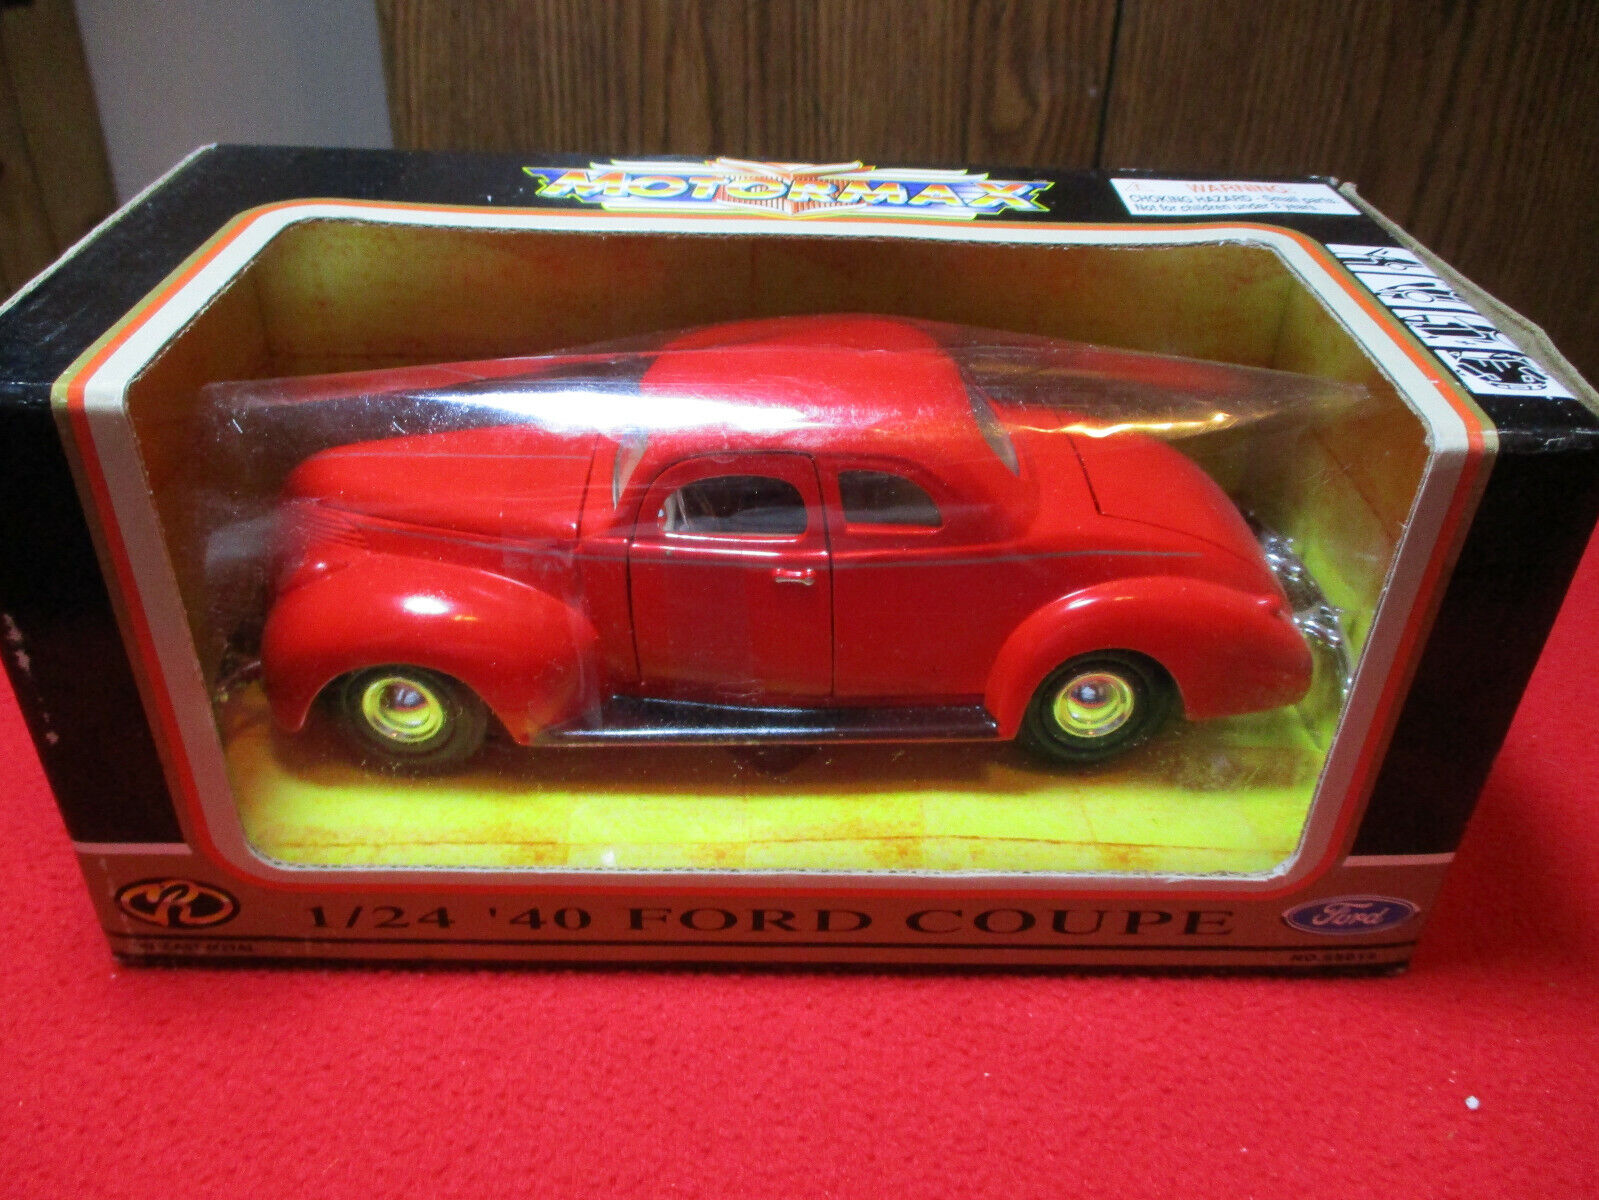 MOTORMAX 1 24 Scale Diecast 1940 Ford Coupe Red for sale online | eBay